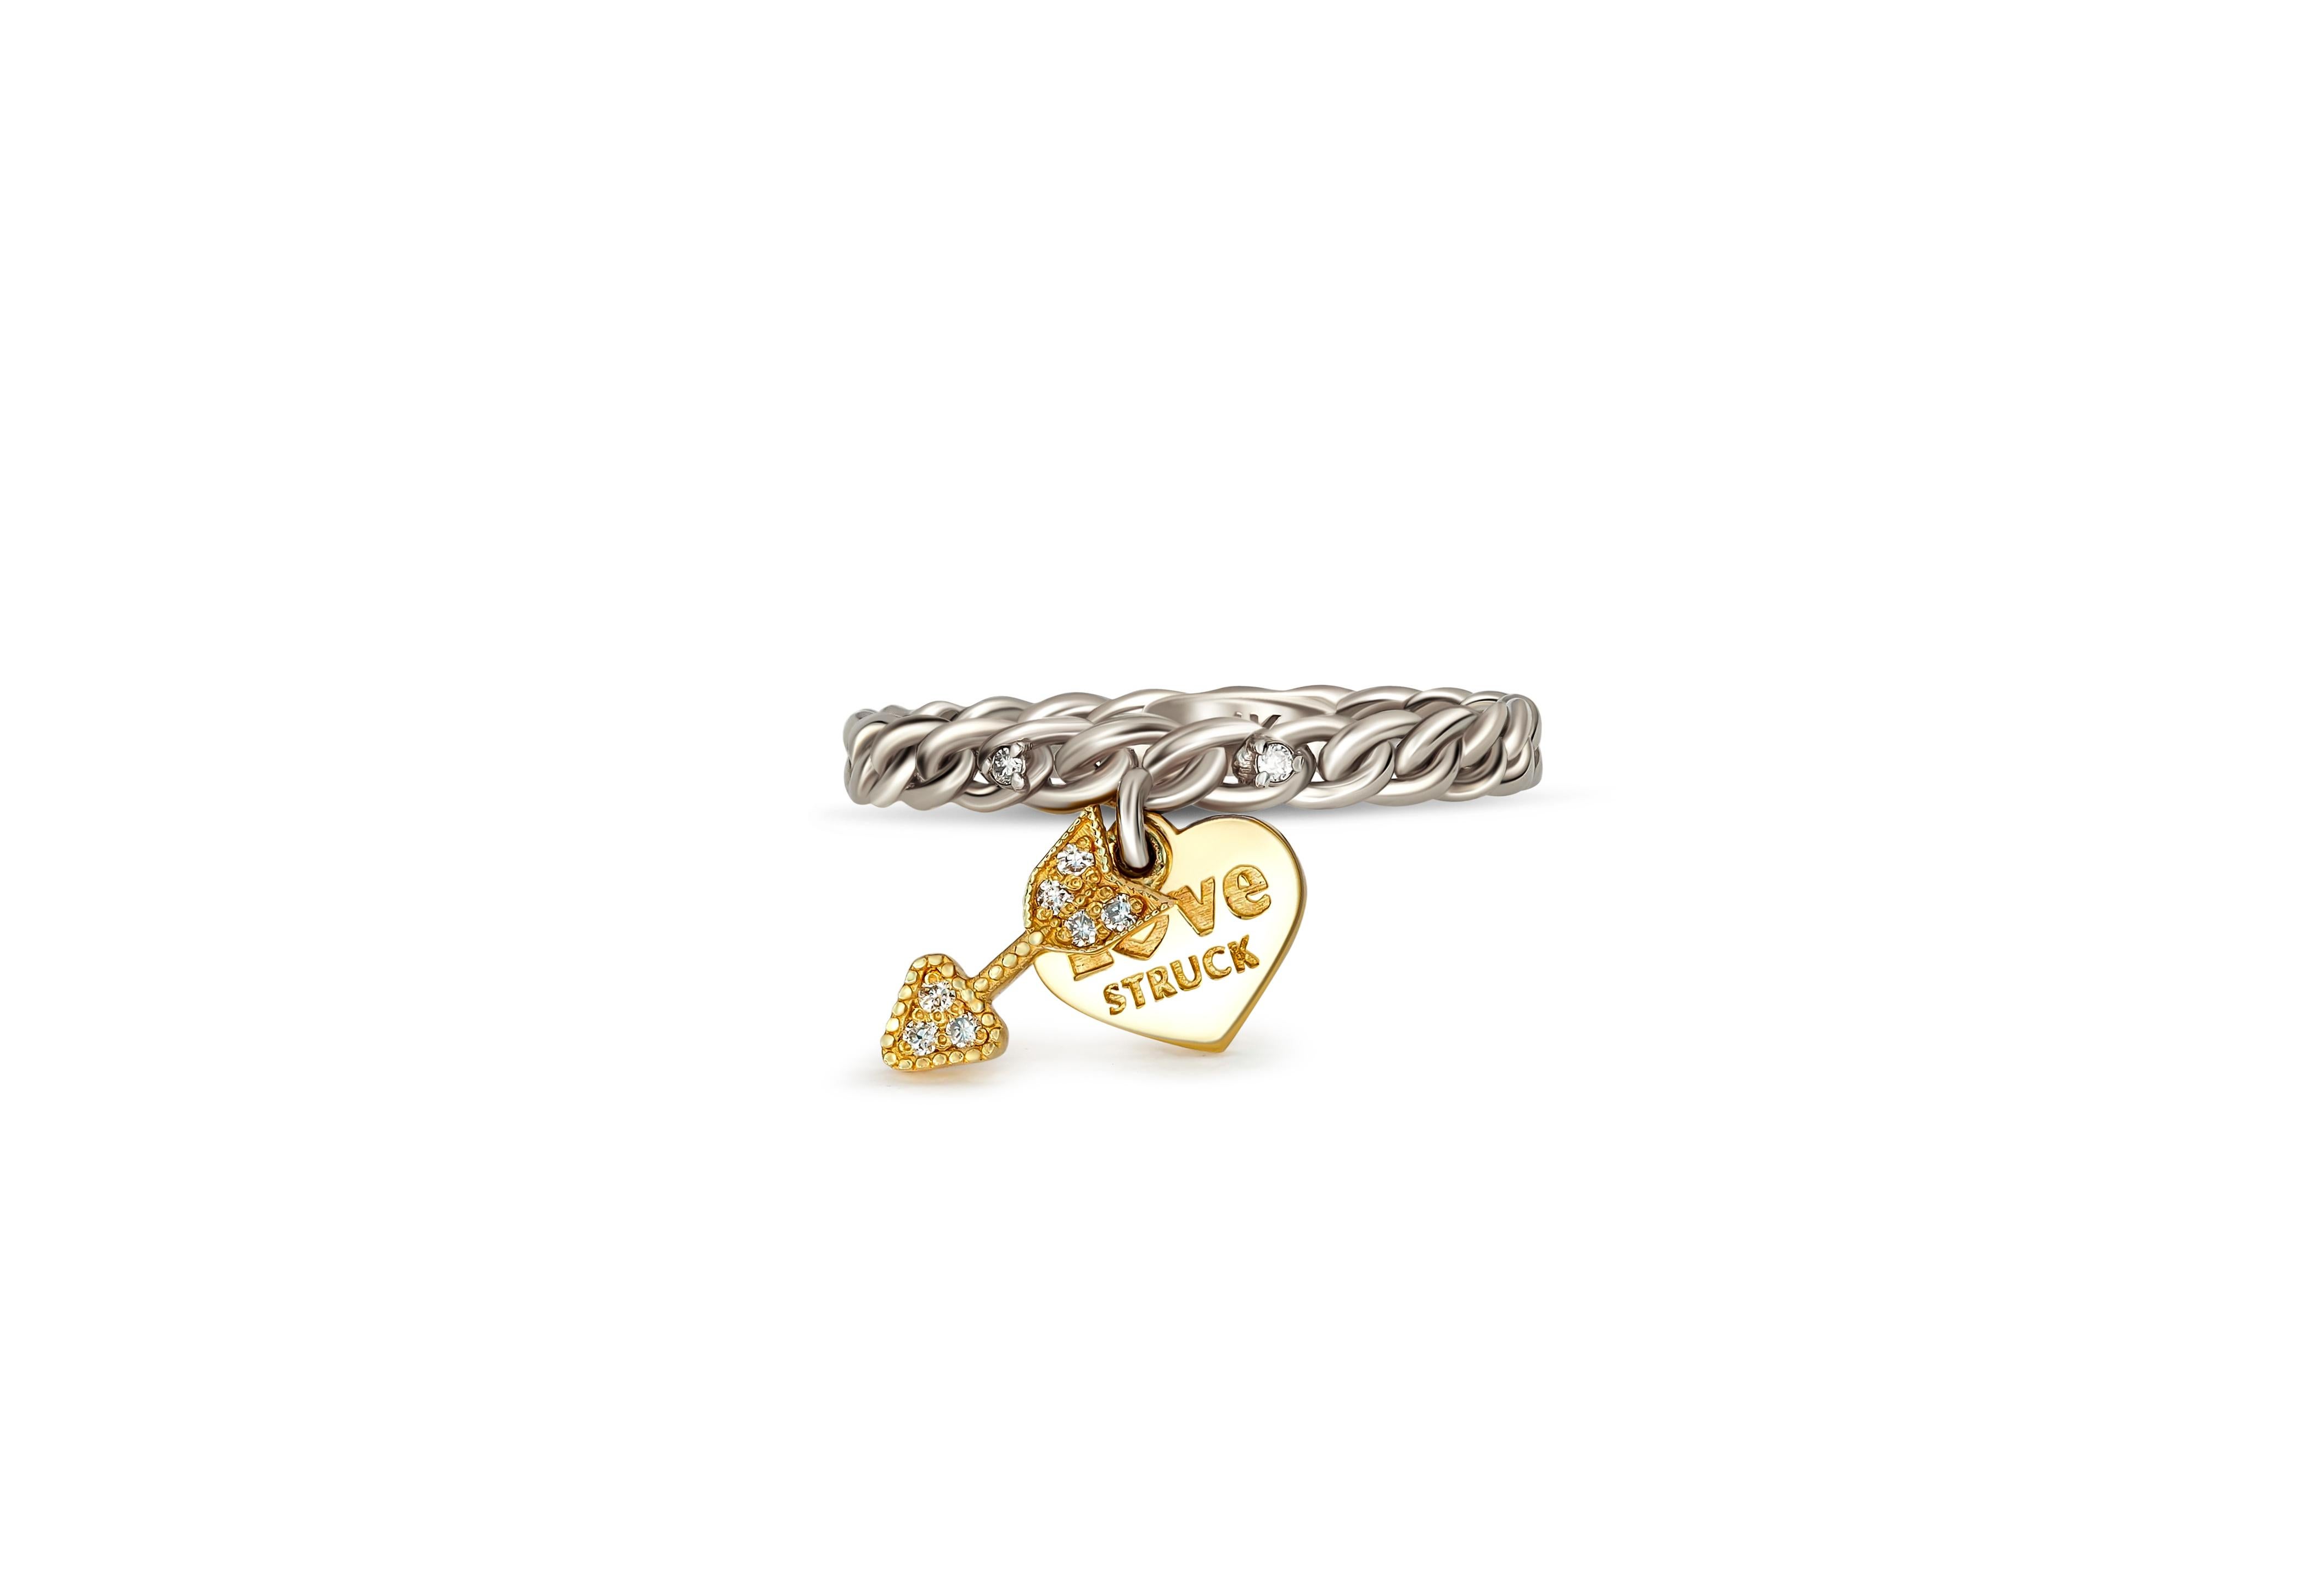 Heart and arrow 14k gold ring with diamonds. 
Cupid Diamond Ring. Gold Diamond Jewelry. Valentines Day Gift. Love Jewelry.

Metal: 14k gold
Total weight: 2.00 gr. depends from size.

Gemstones: diamonds - 9 pieces (9 x0.01 ct - 0.09 ct), G color, VS